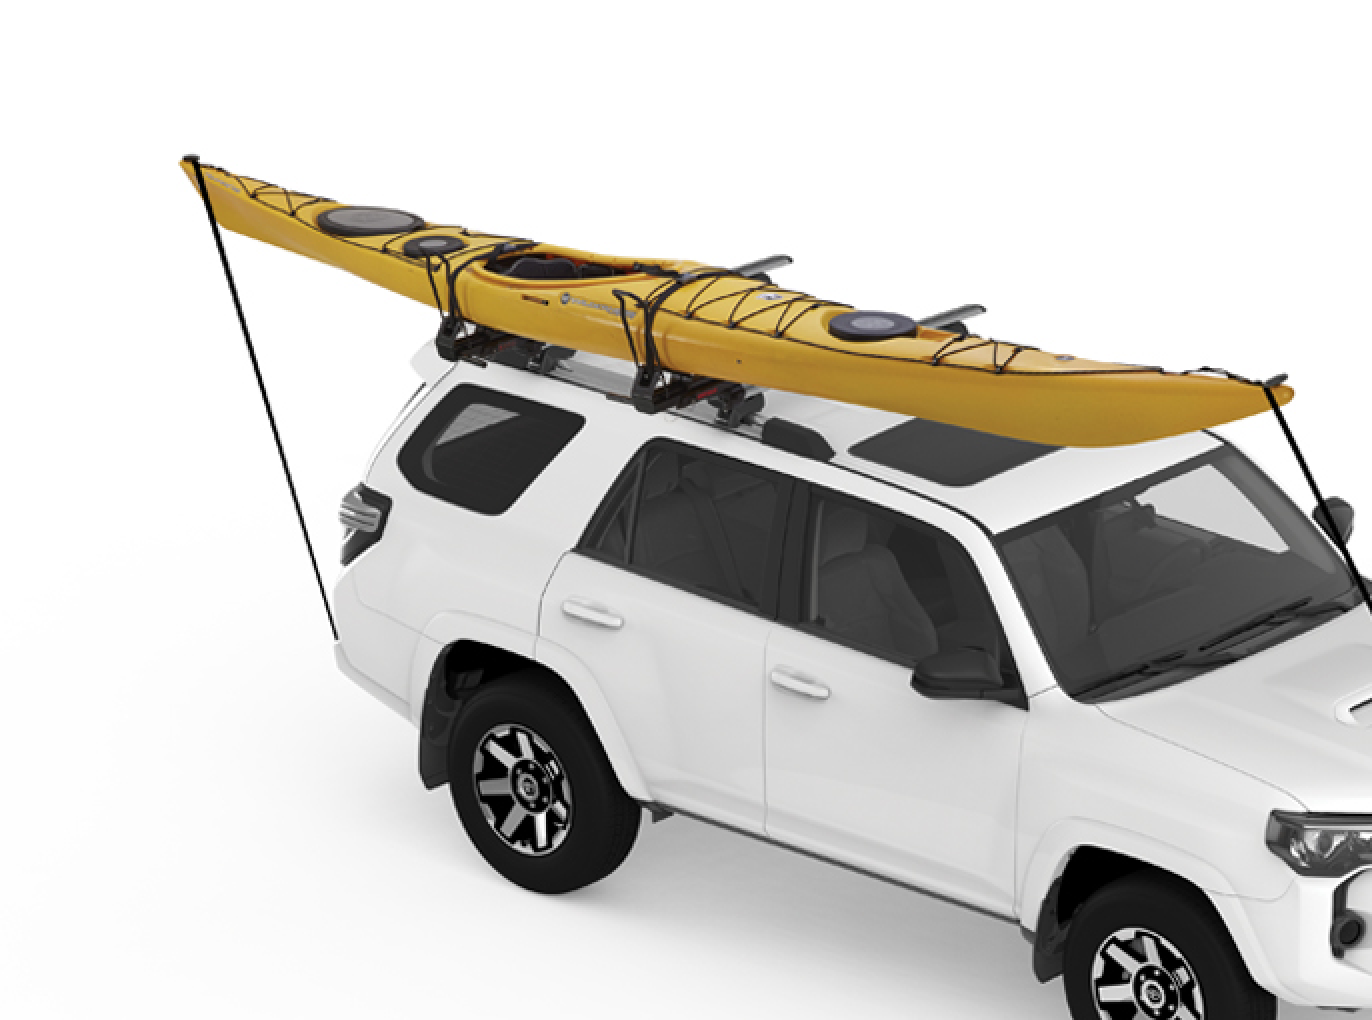 Lift, Carry and Load your own Kayak!